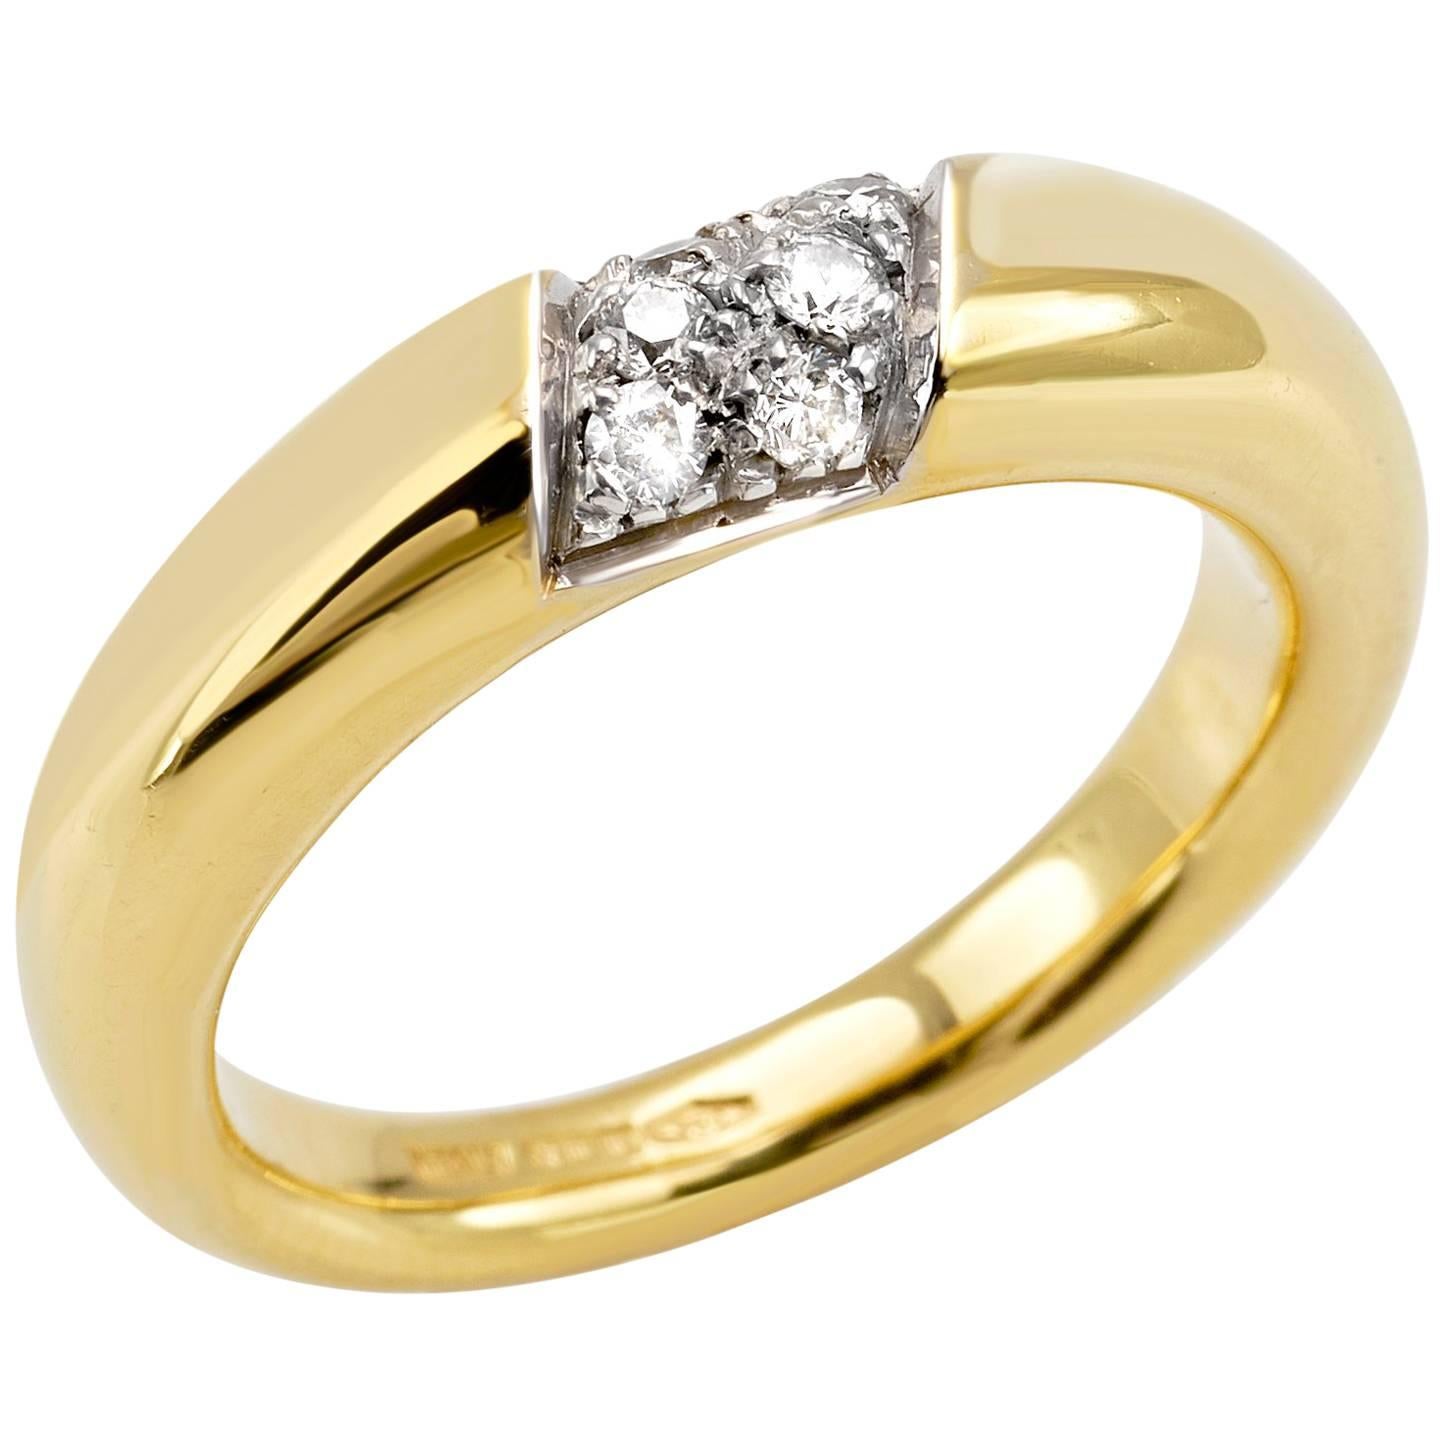 Ring from the Collection "Essence" 18 Karat Yellow Gold and Diamonds